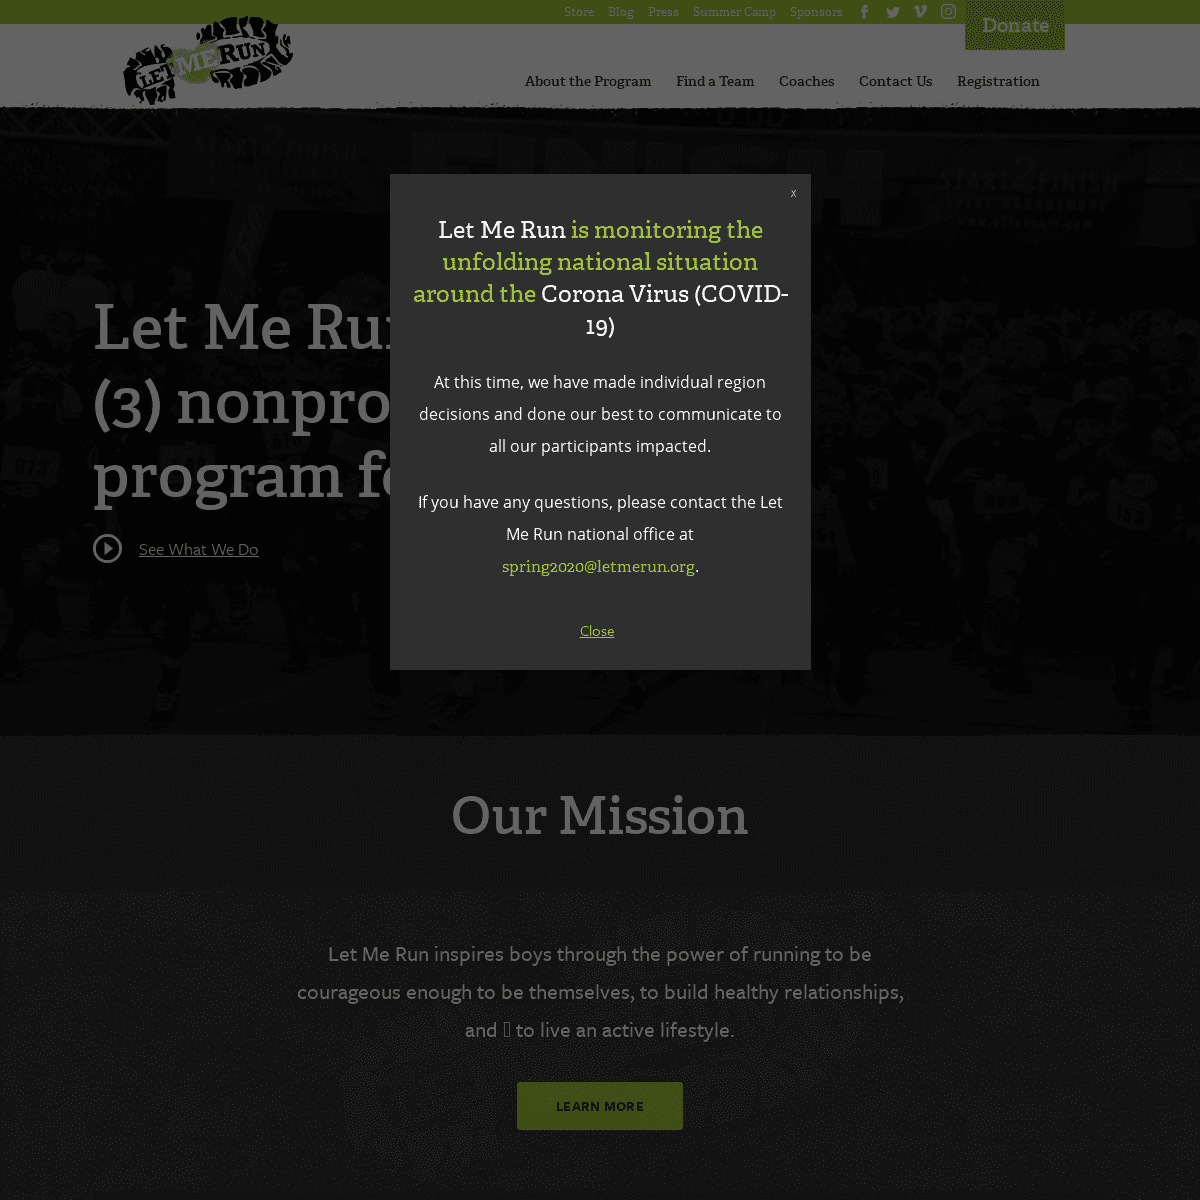 A complete backup of letmerun.org